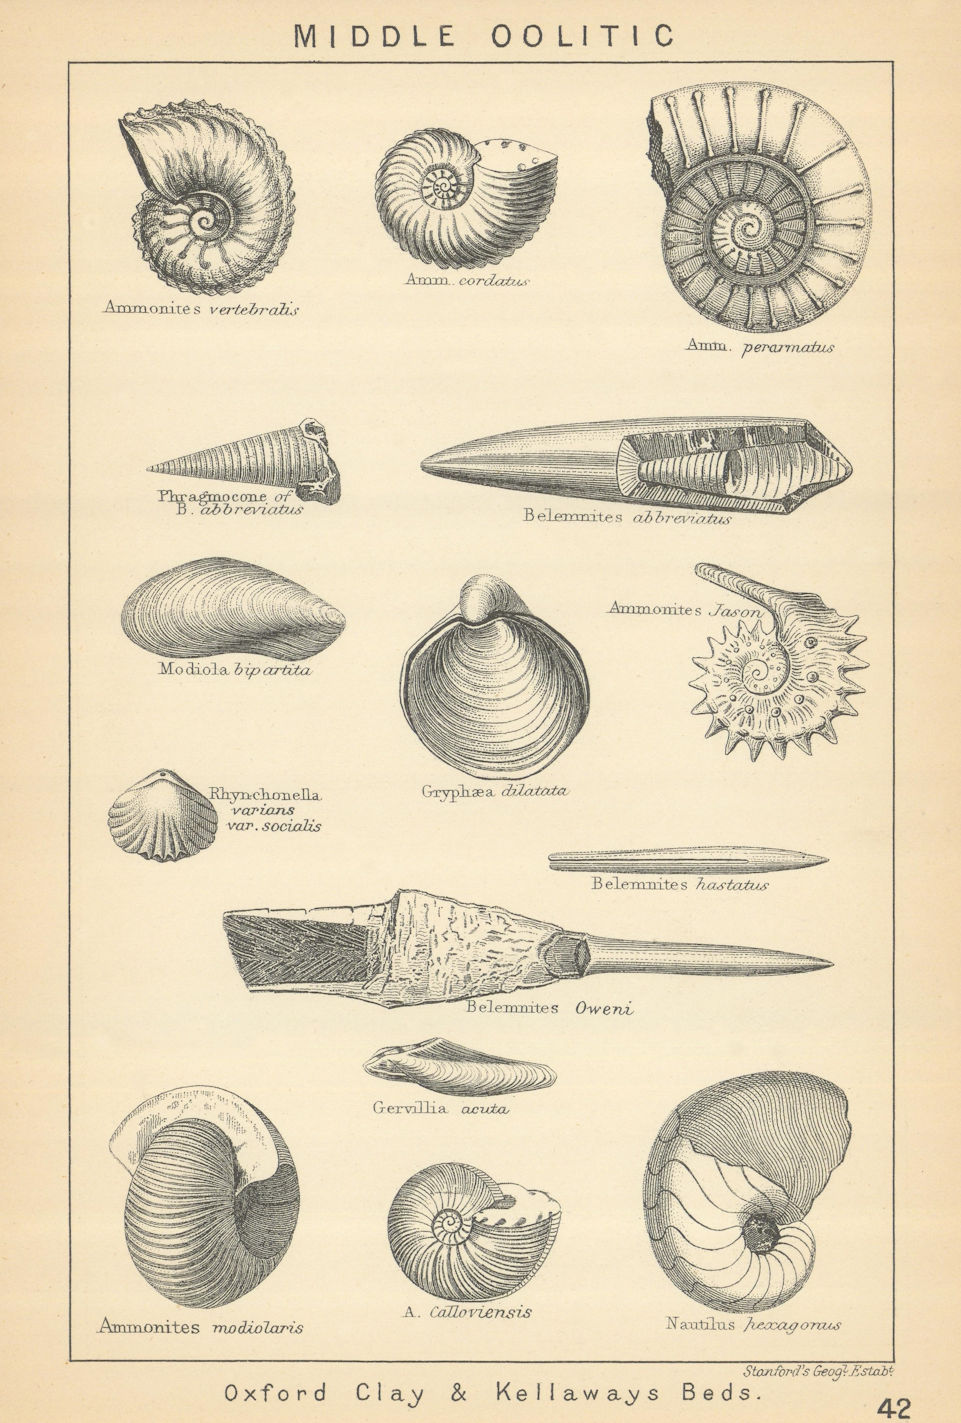 Associate Product BRITISH FOSSILS. Middle Oolitic - Oxford Clay & Kellaways Beds. STANFORD 1904